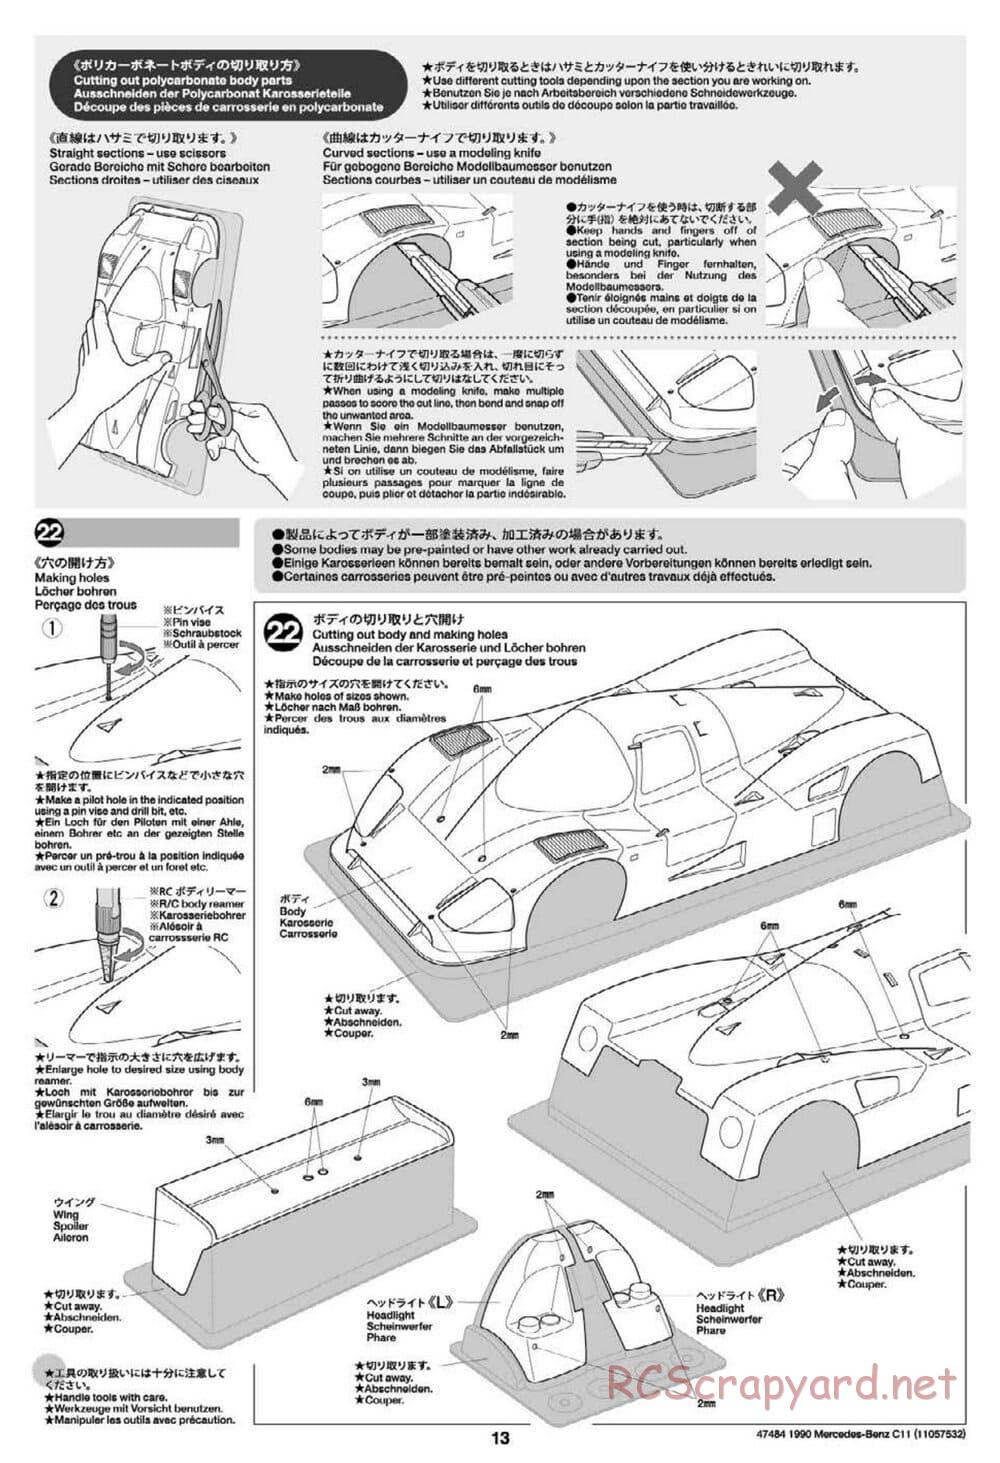 Tamiya - 1990 Mercedes-Benz C11 - Group-C Chassis - Manual - Page 13